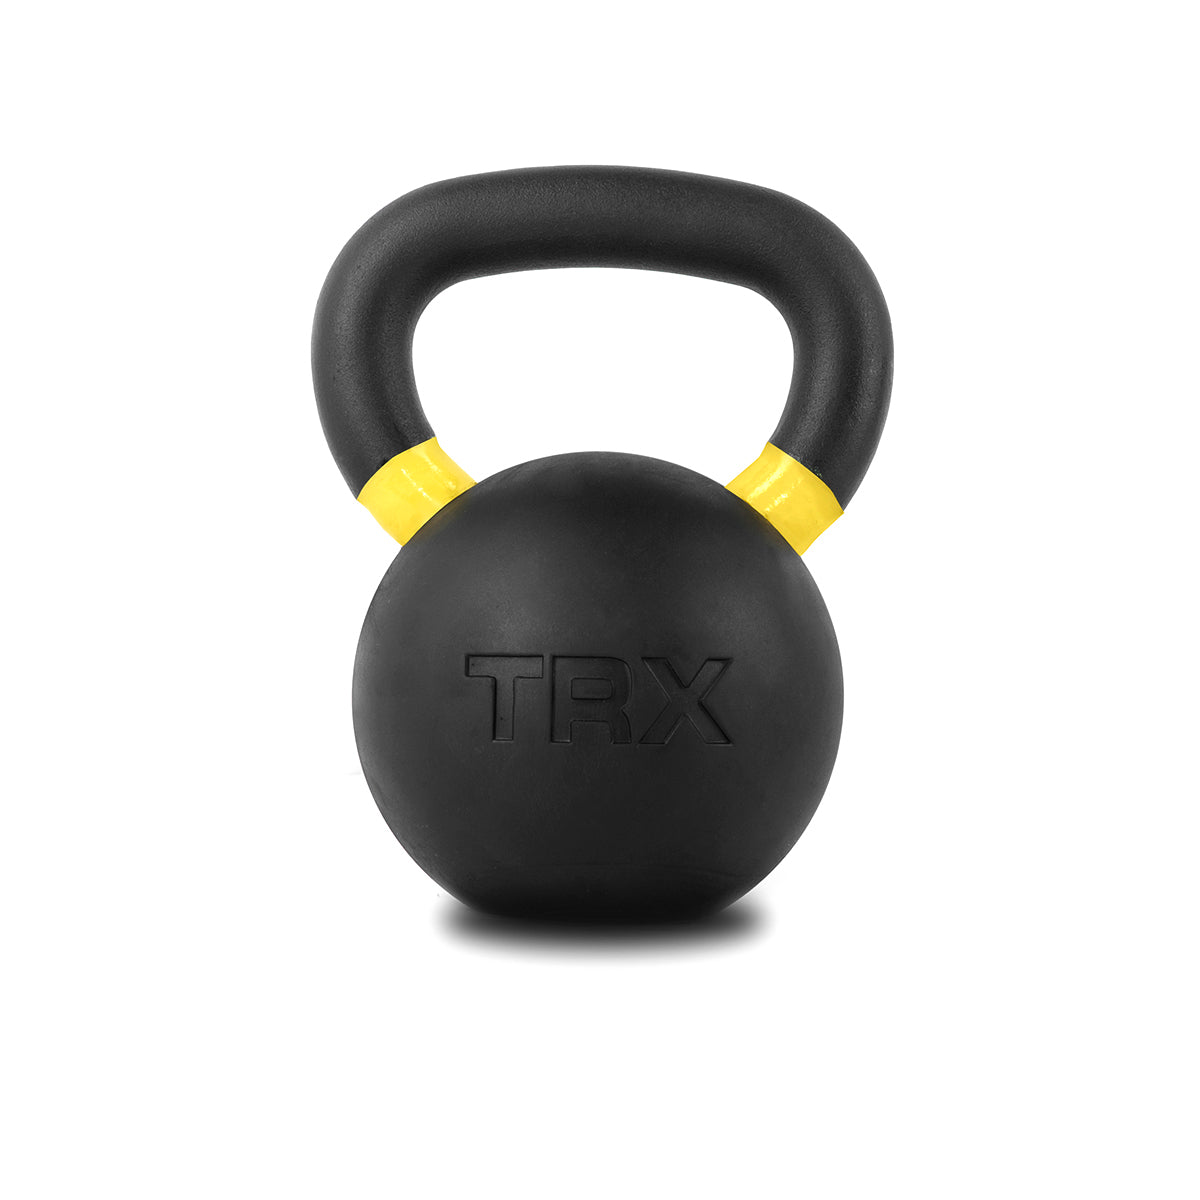 Top grade gym fitness weight exercise competition steel kettlebell